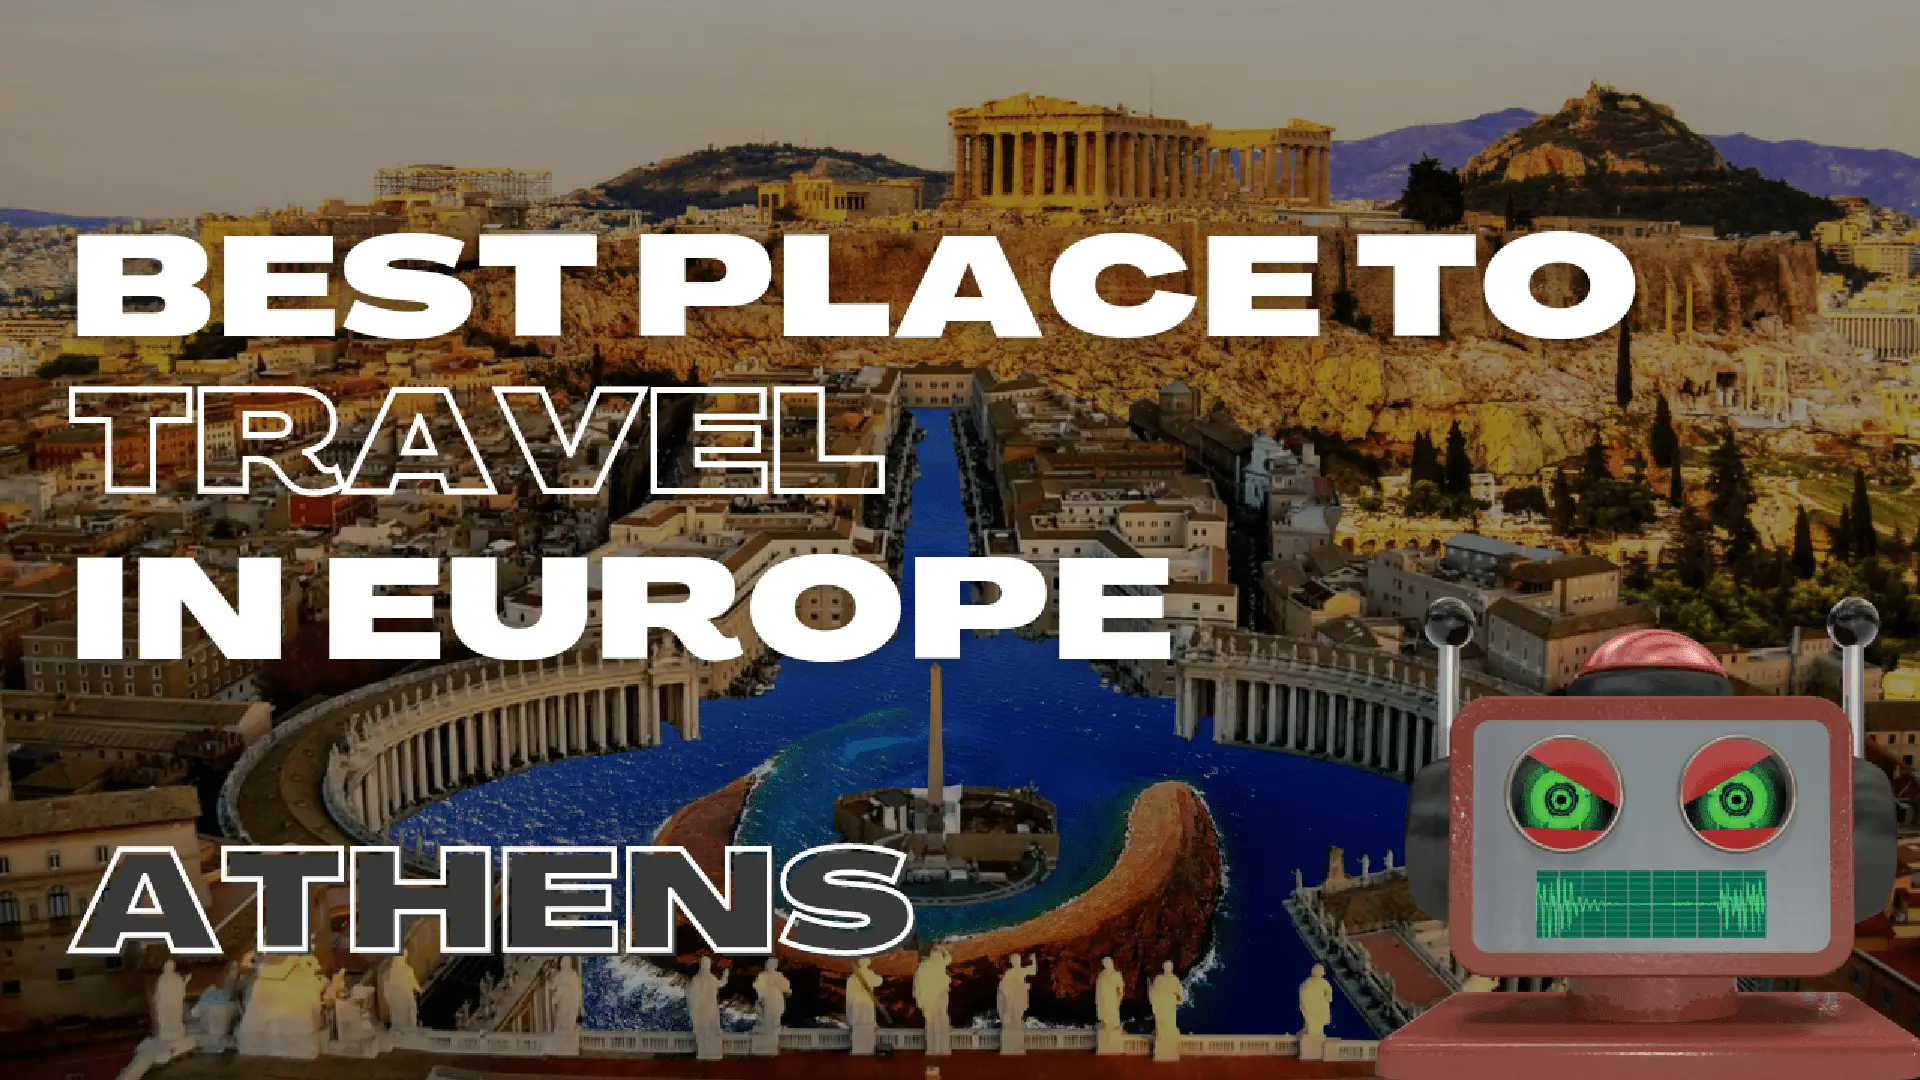 BEST PLACE TO TRAVEL IN EUROPE (Athens)